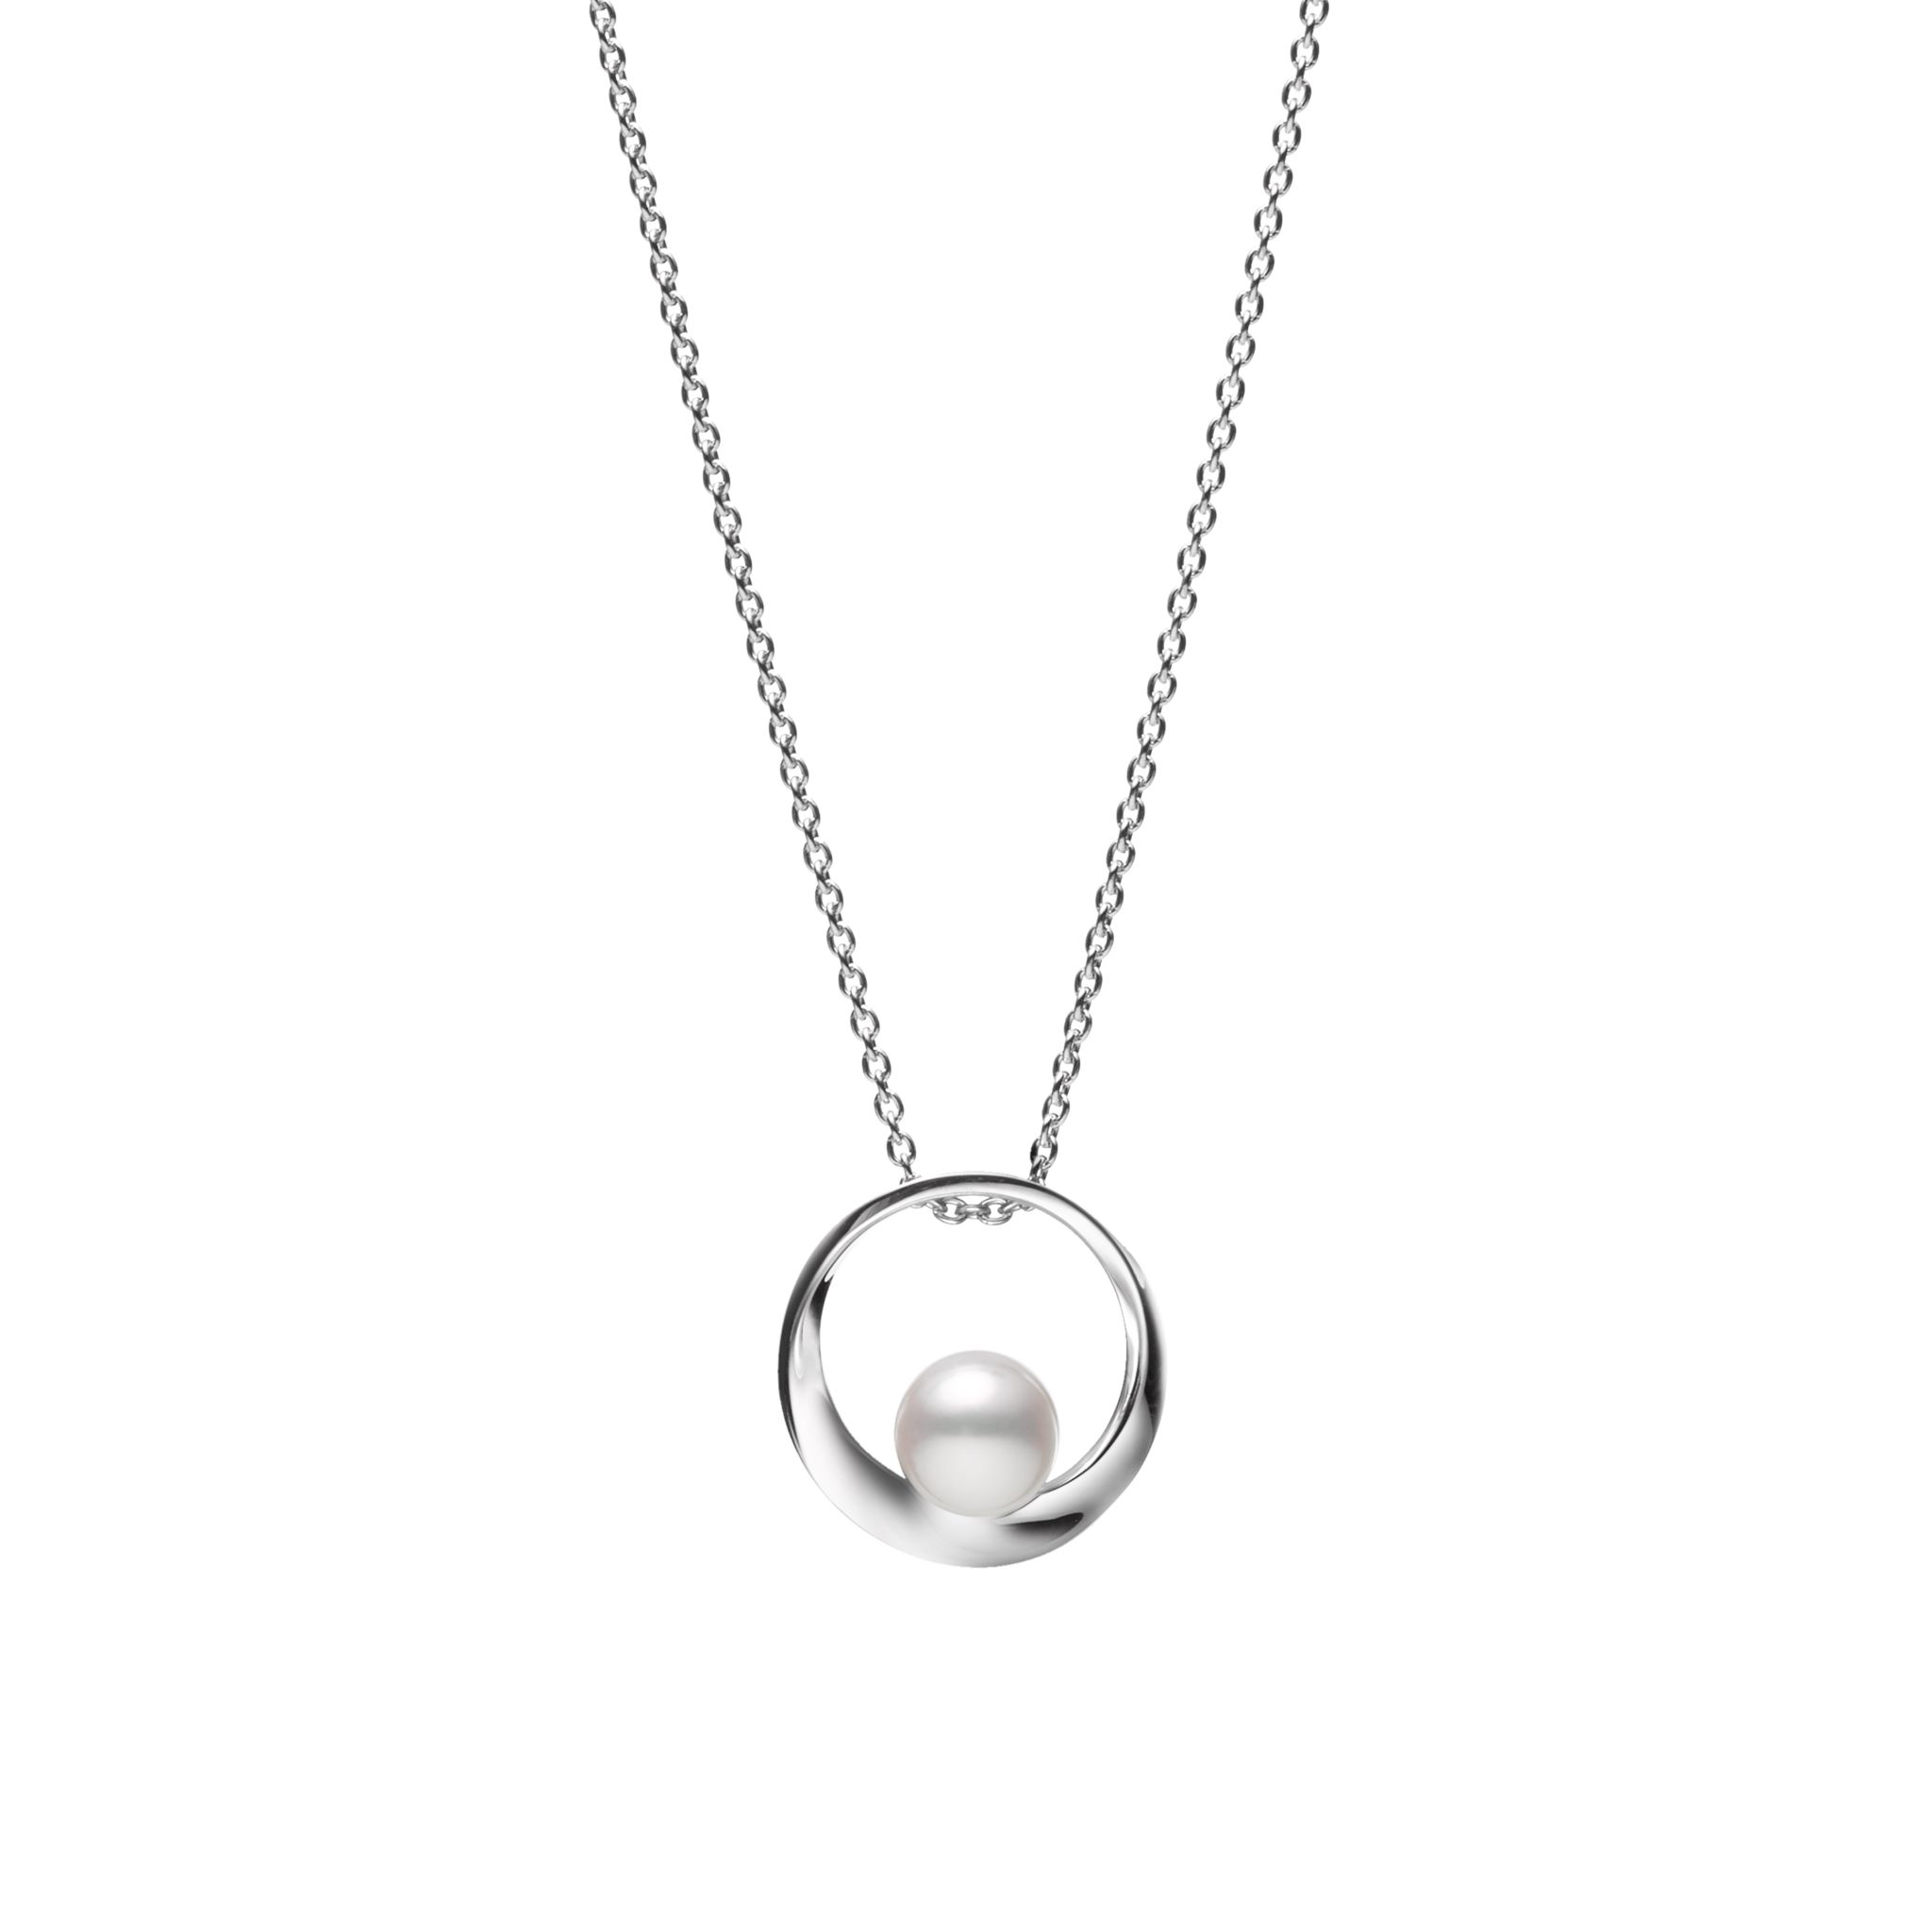 This pearl teardrop cradle necklace by Mikimoto is crafted from 18k white gold and features a 6.5mm Akoya pearl.